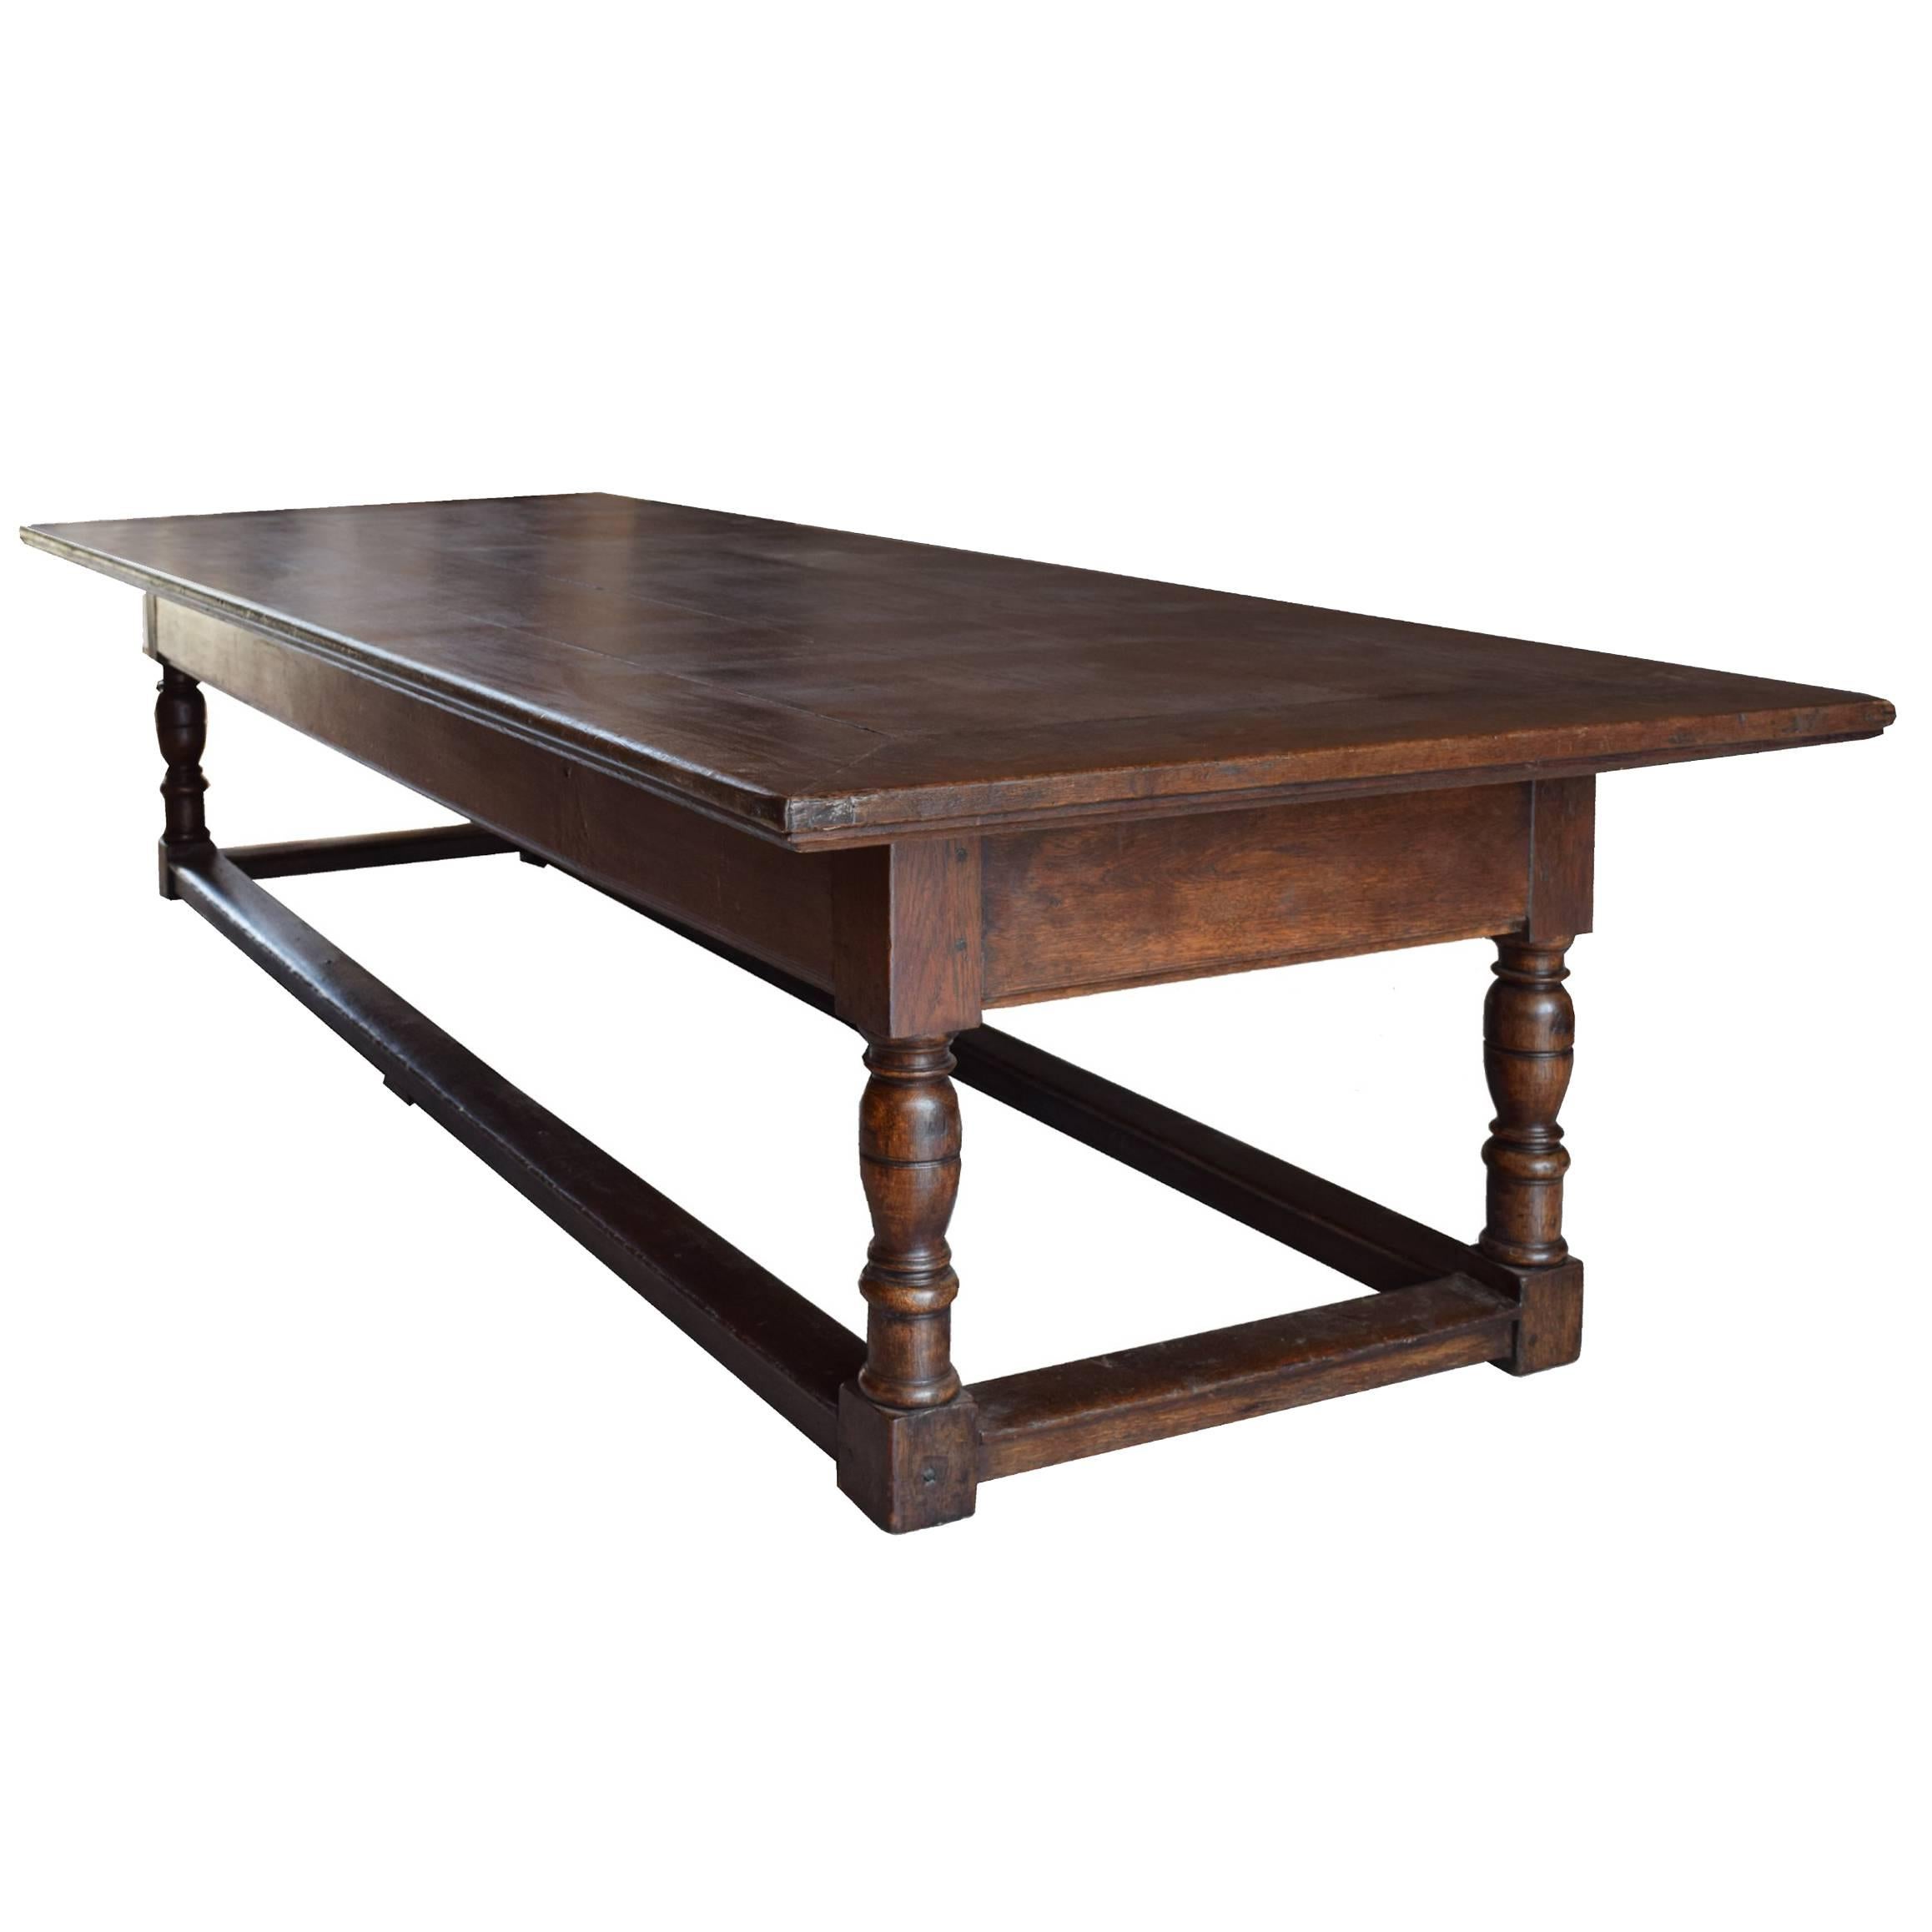 Monumental French Refectory Oak Table